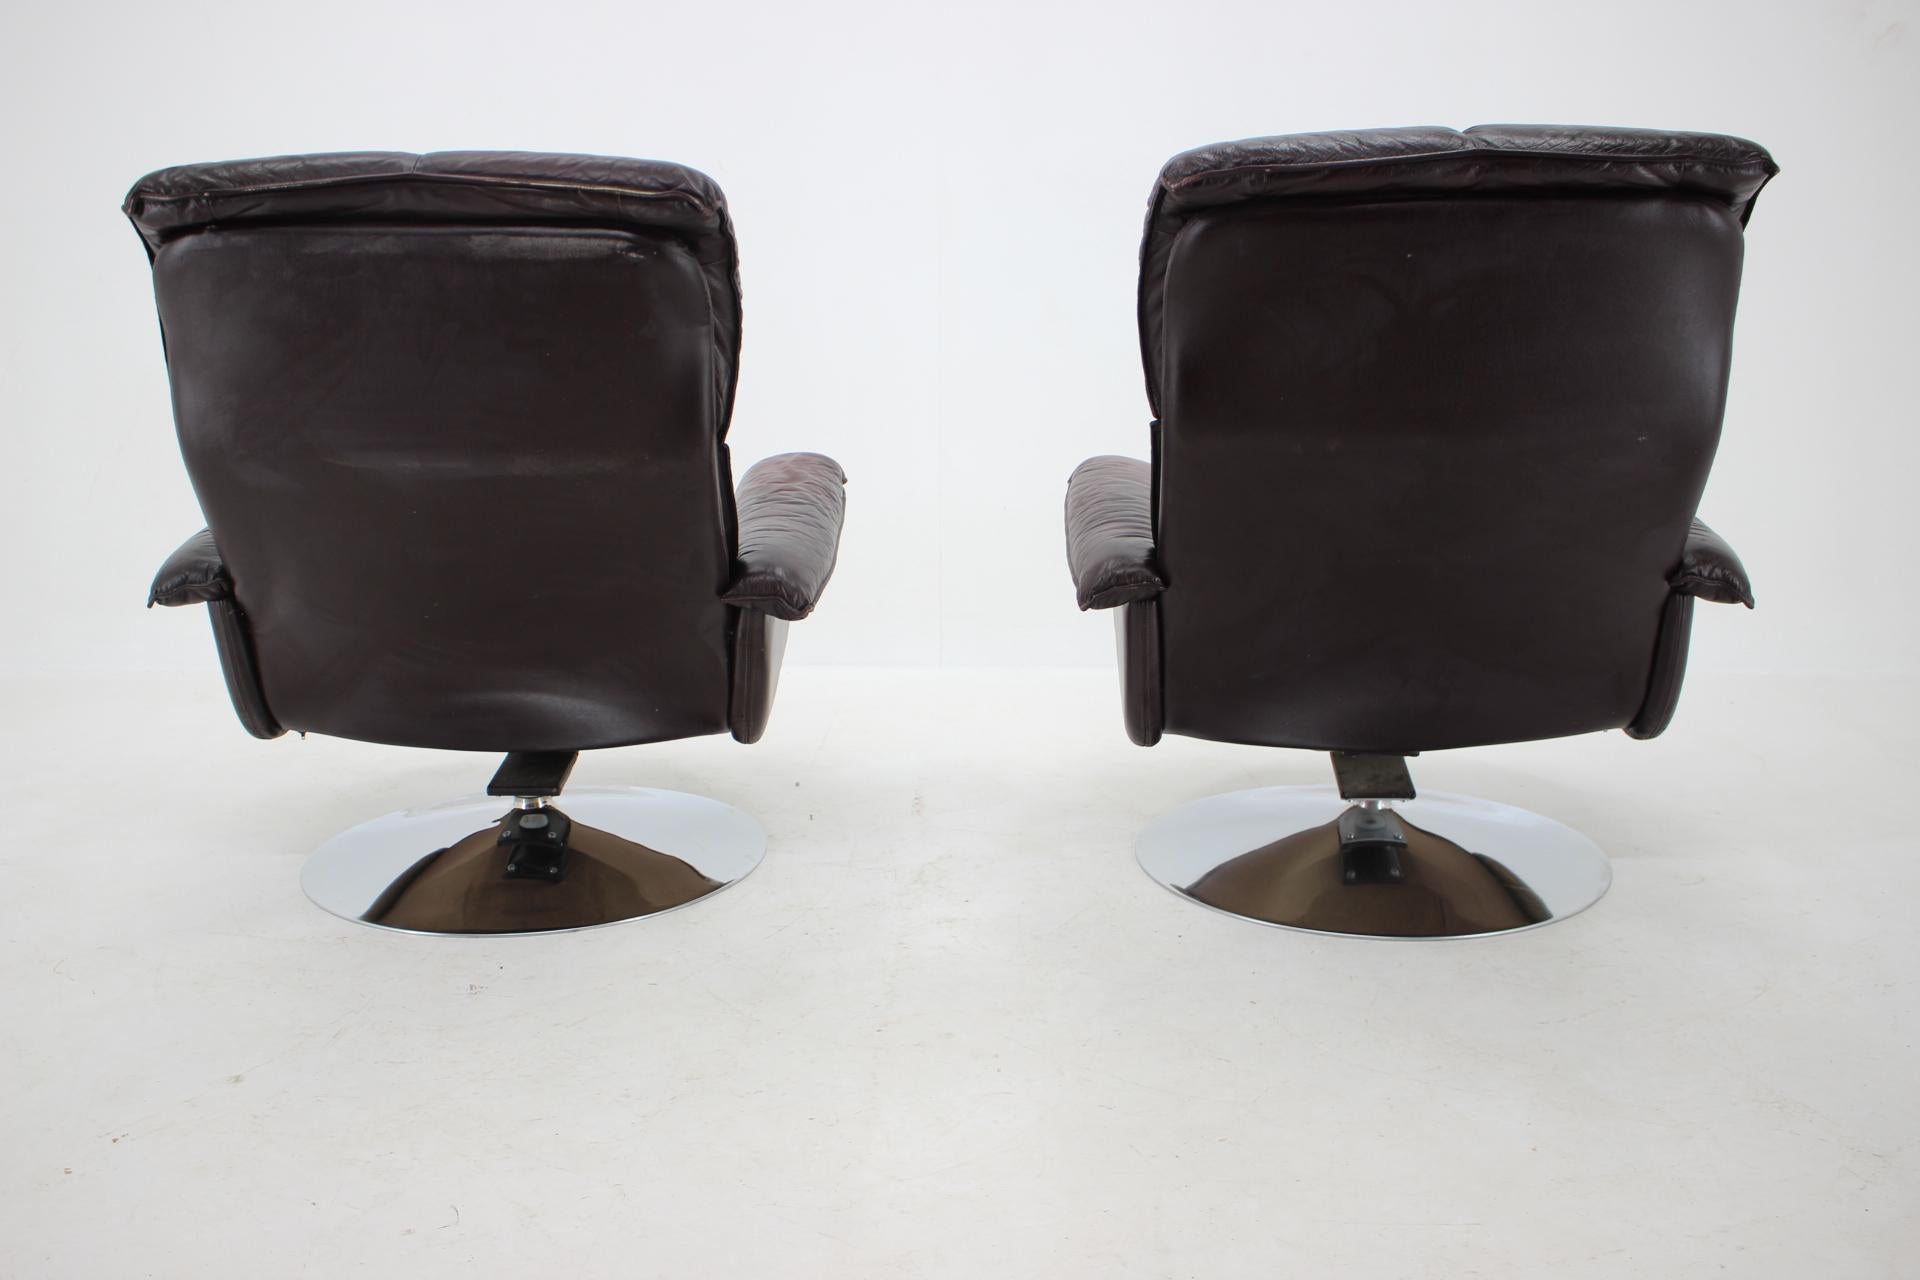 Scandinavian Space Age Style Leather and Chrome Armchairs by M-TOP, 1970s For Sale 3